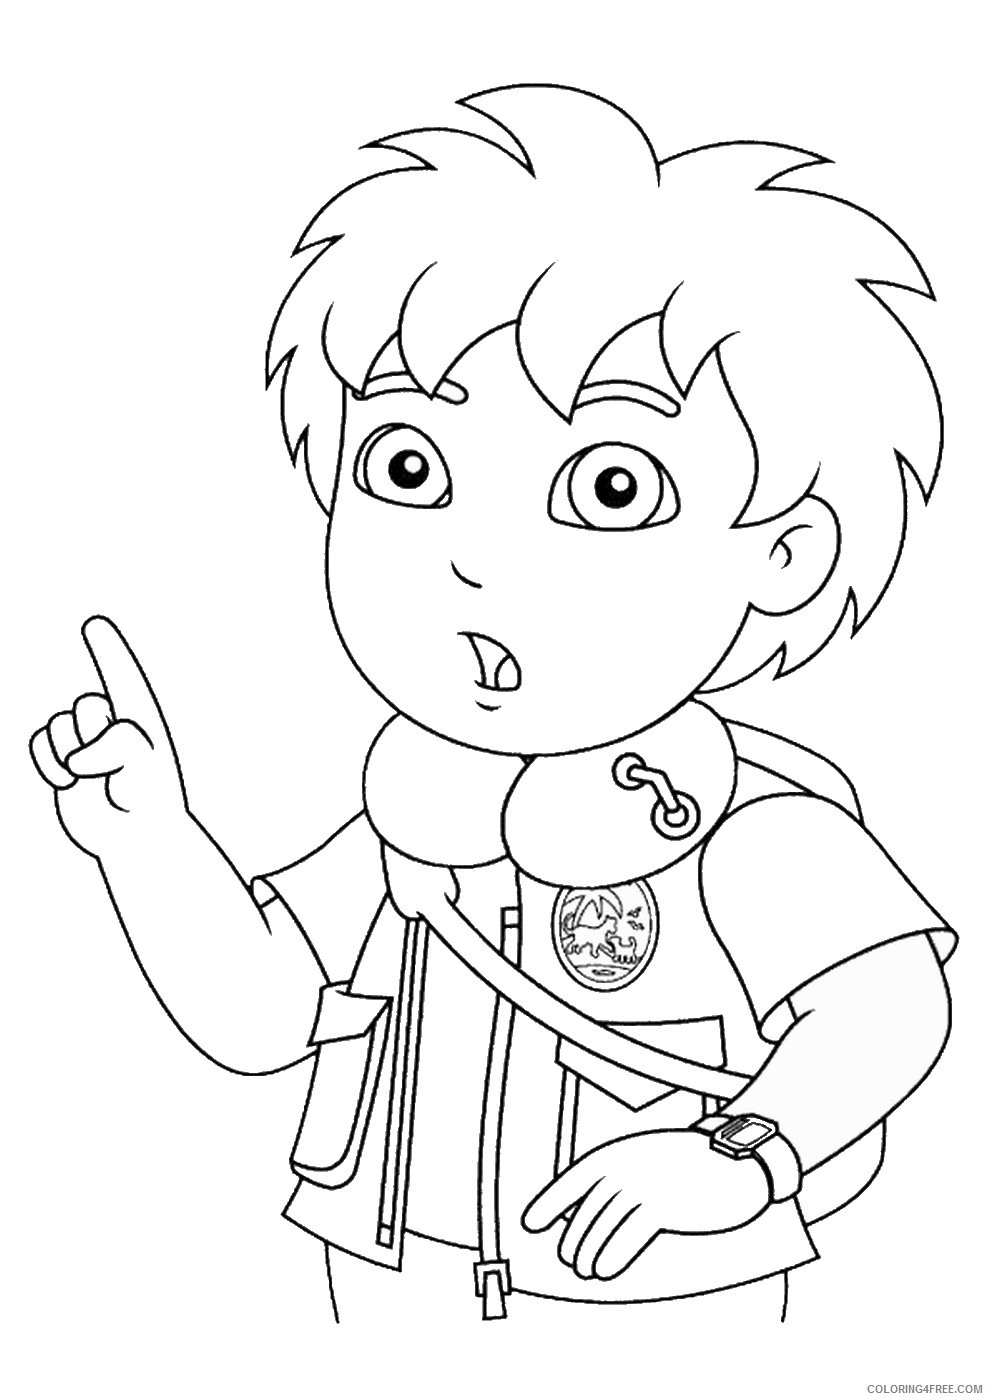 Go Diego Go Coloring Pages Cartoons run_diego_cl_23 Printable 2020 2963 Coloring4free